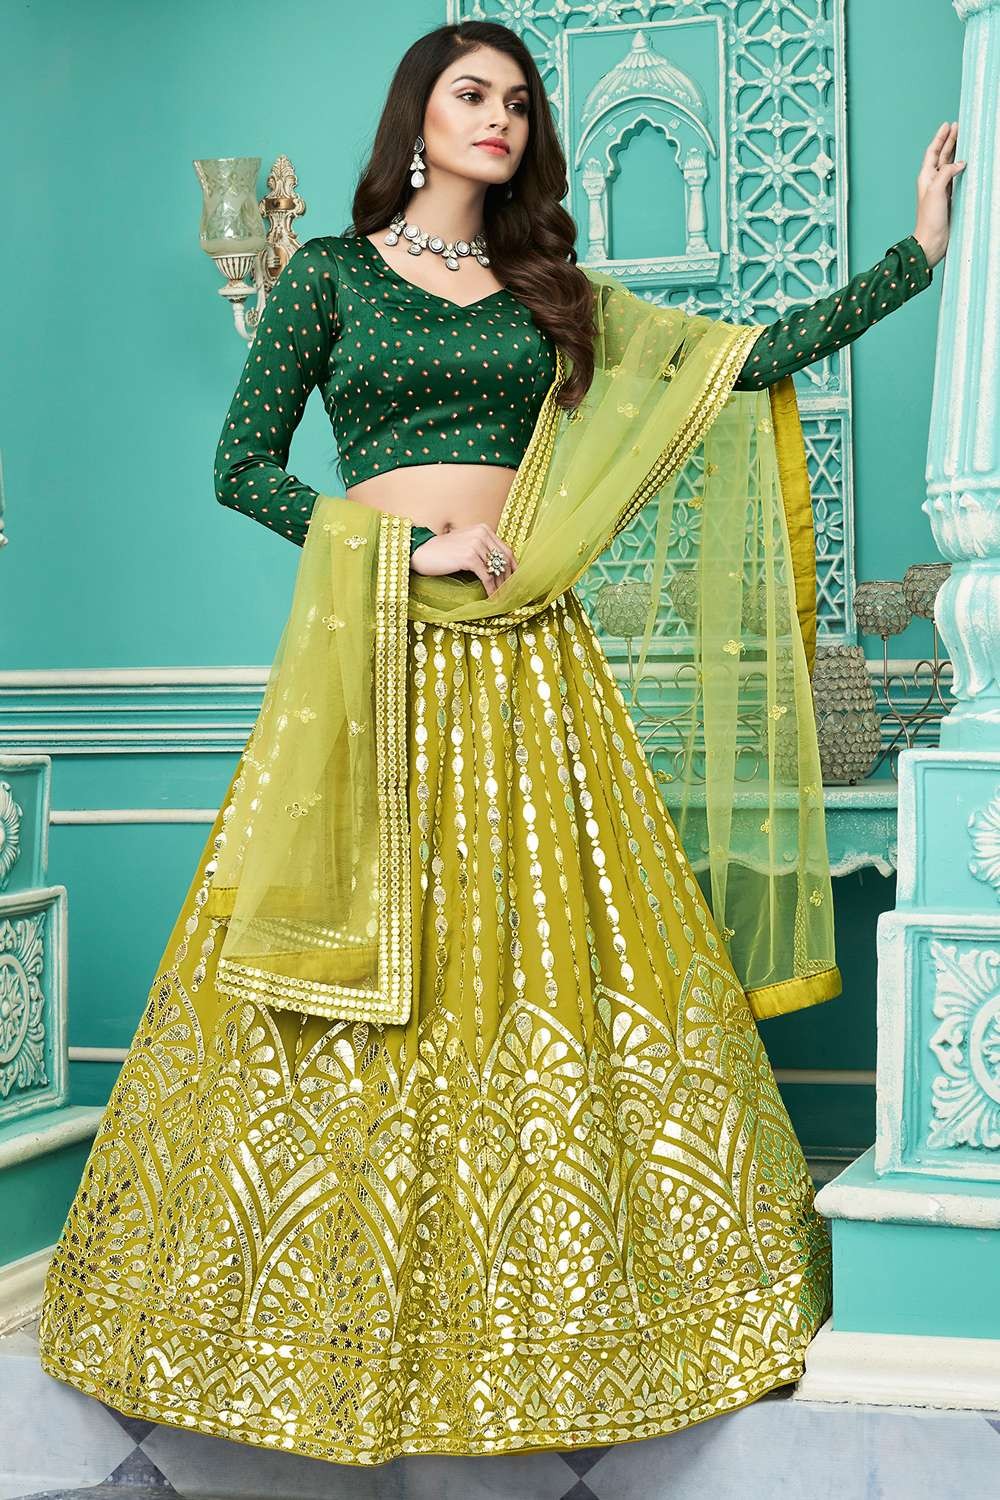 act8529 1 mehndi georgette embroidered party lehenga choli with dupatta lc4759 2